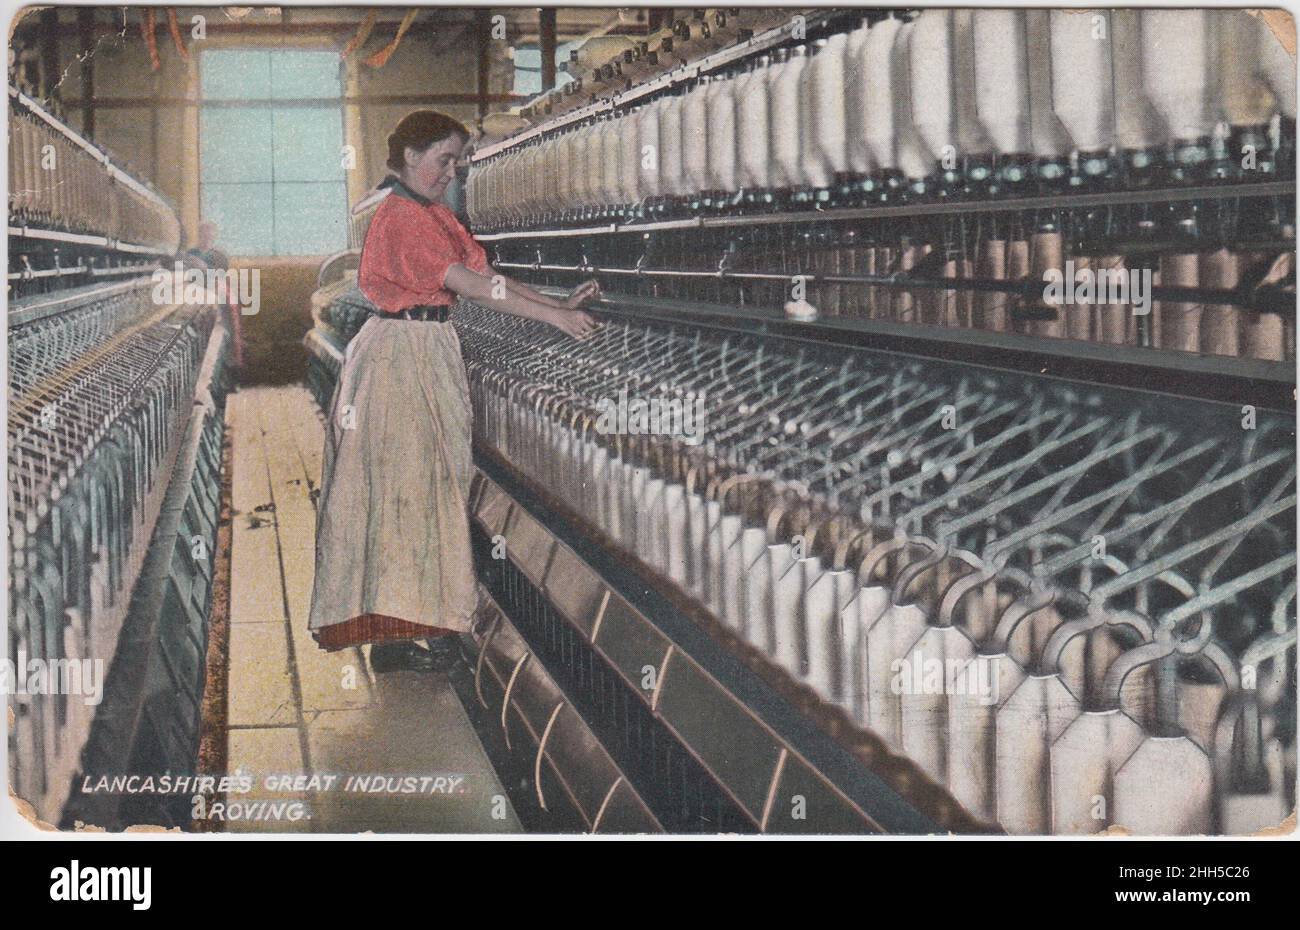 'Lancashire's great industry: Roving': Woman standing next to mill machinery. The colourised postcard was published by L. Pickles & Co. of Bradford, and was posted in 1920 Stock Photo